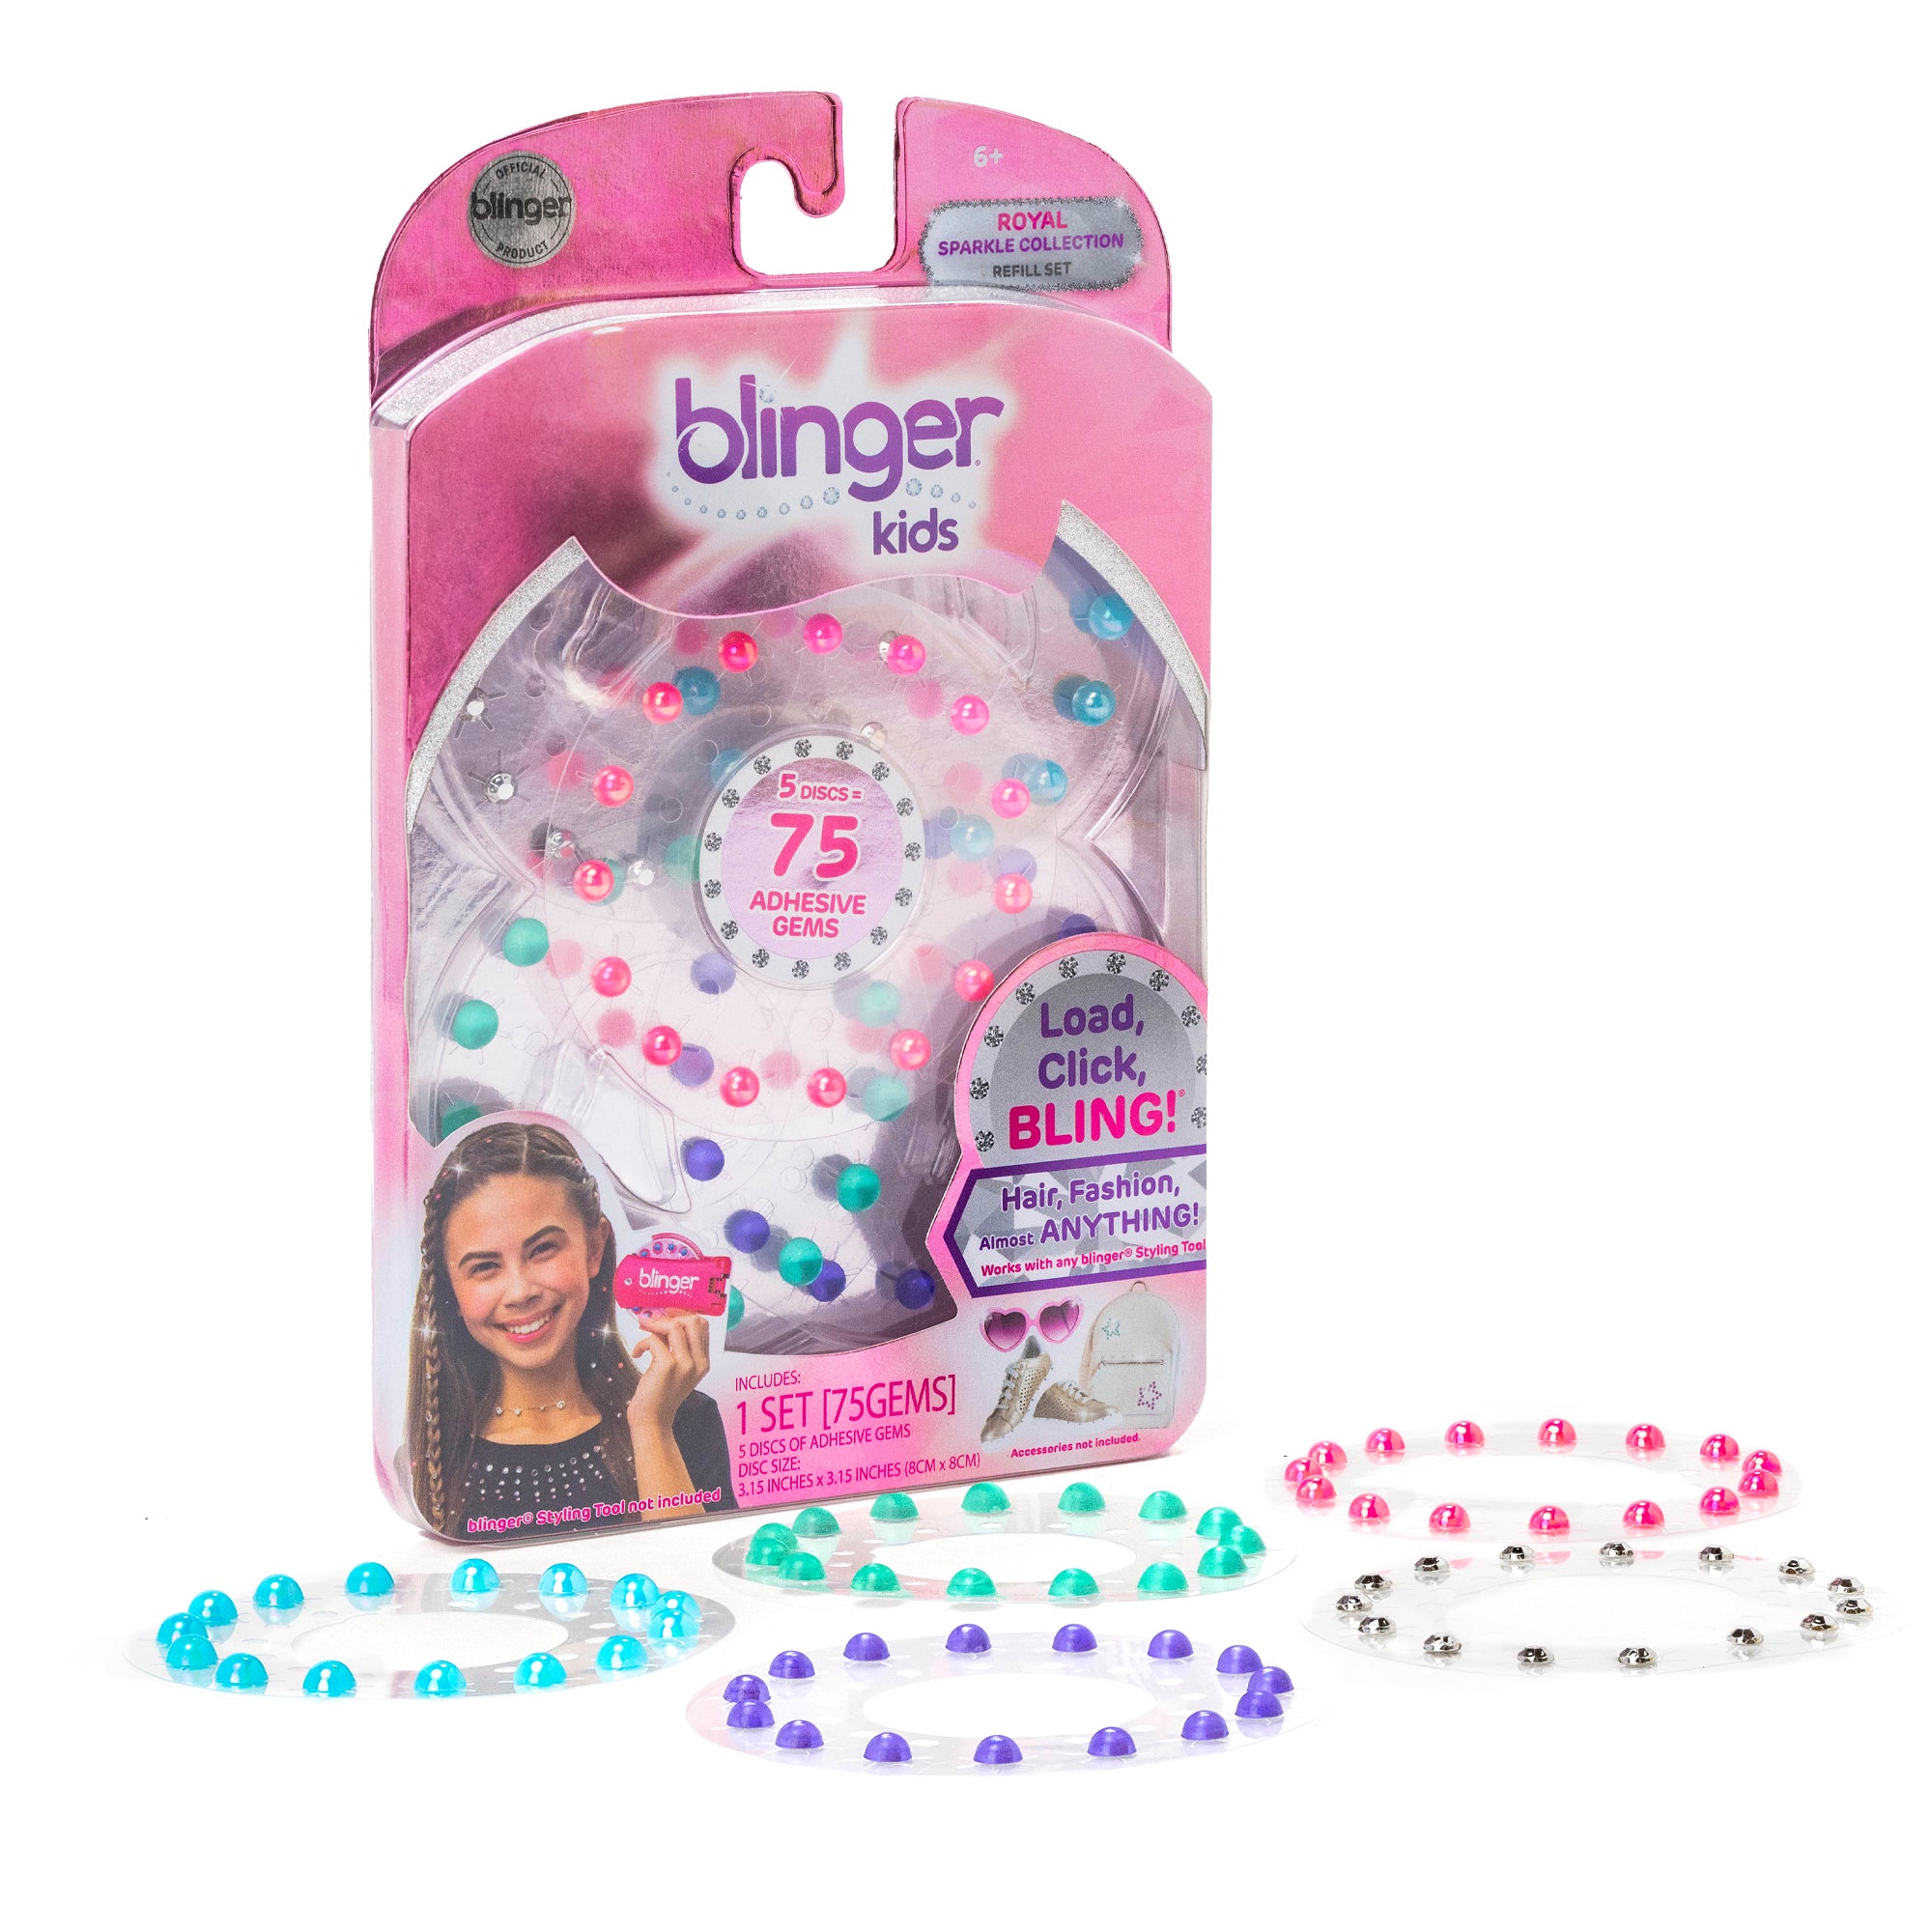 blinger® Sparkle Collection Refill Pack with 75 Colorful Acrylic Rhinestones